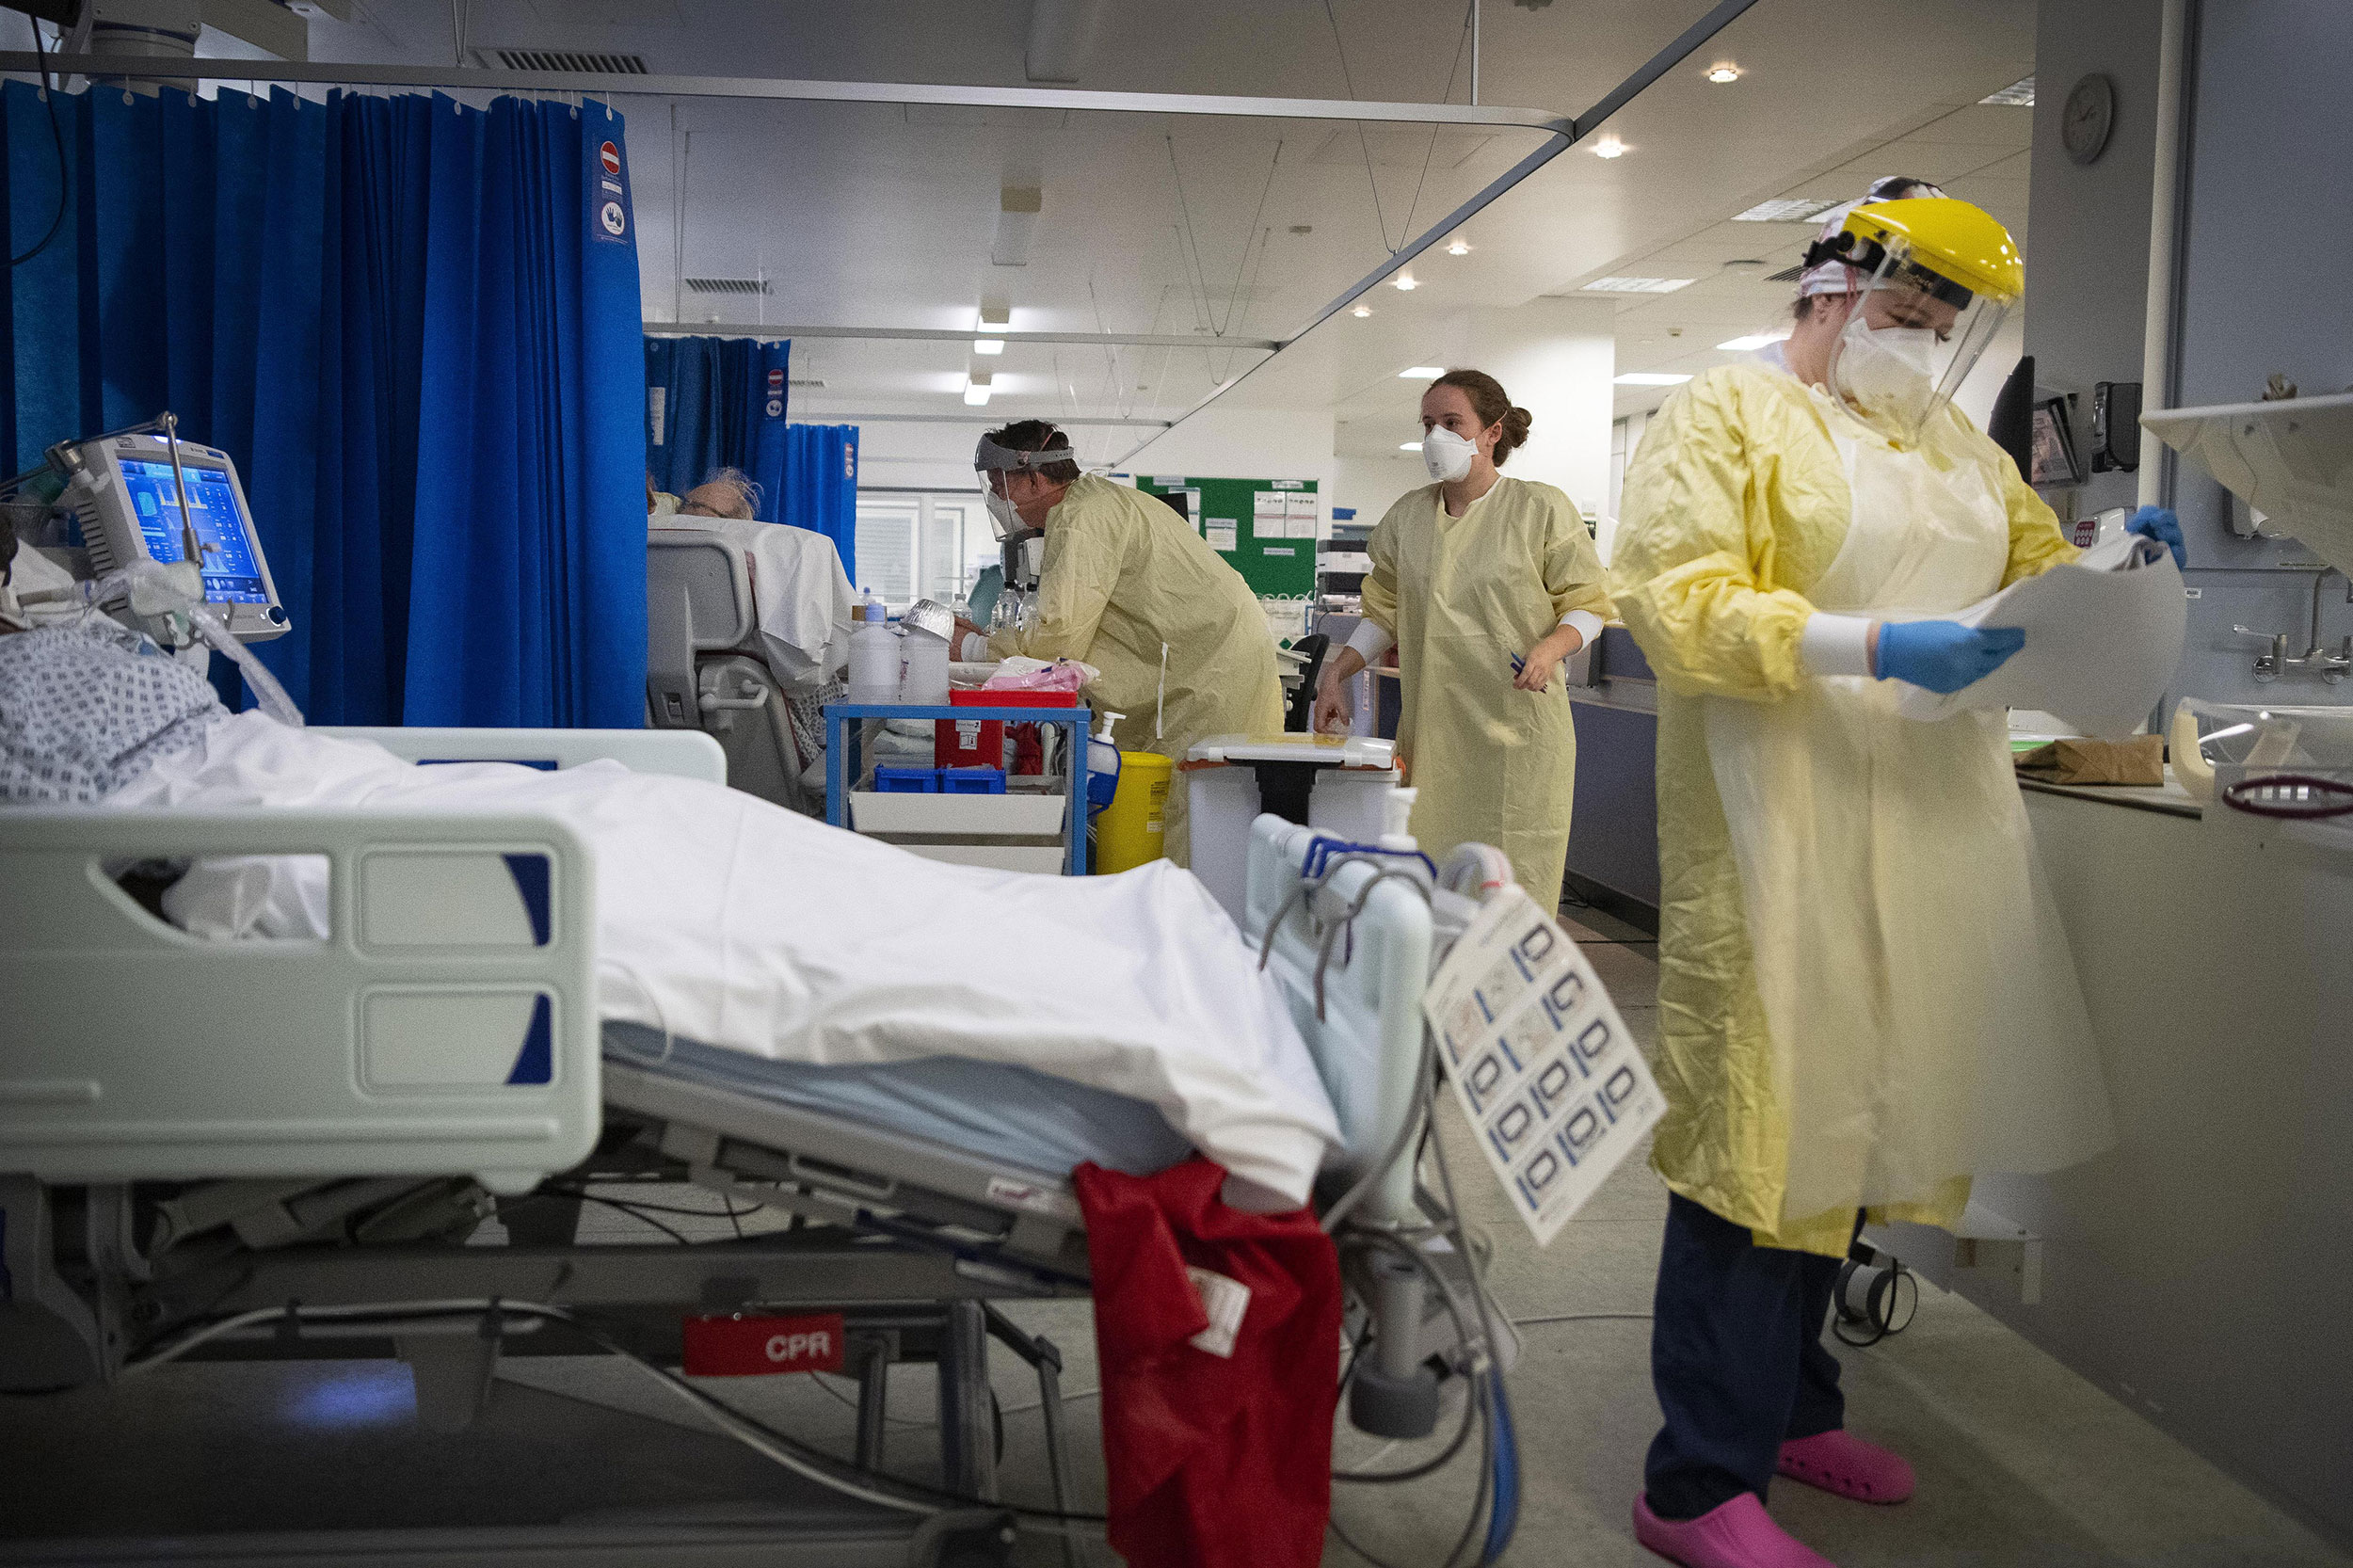 Nurses work on patients in the ICU at St George's Hospital in London on January 7.